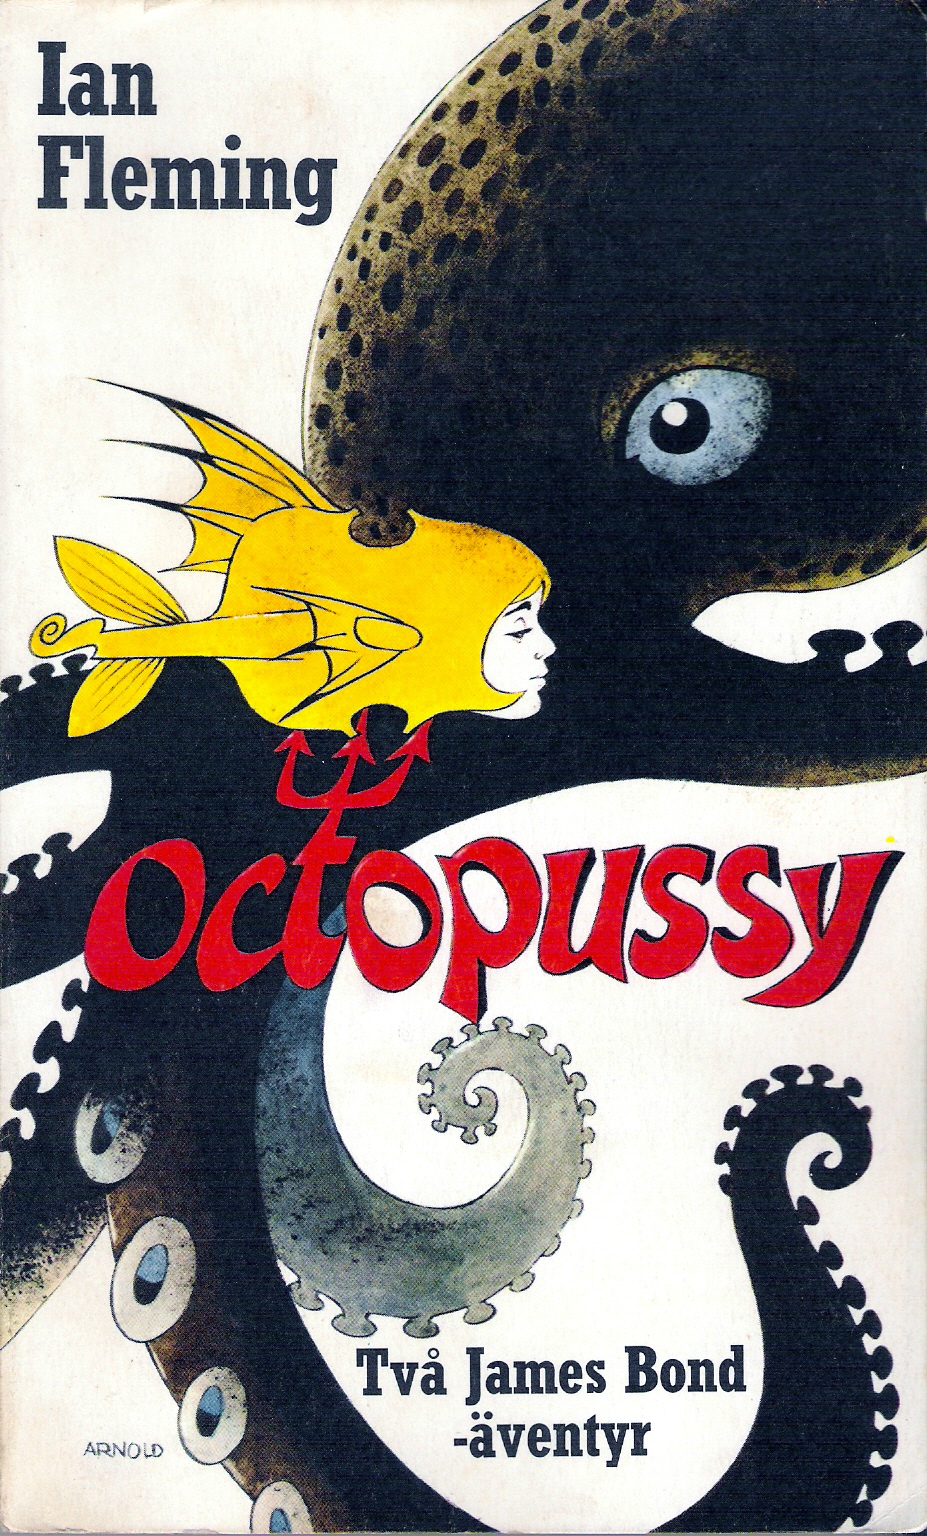 Octopussy (Octopussy and The Living Daylights) Ian Fleming